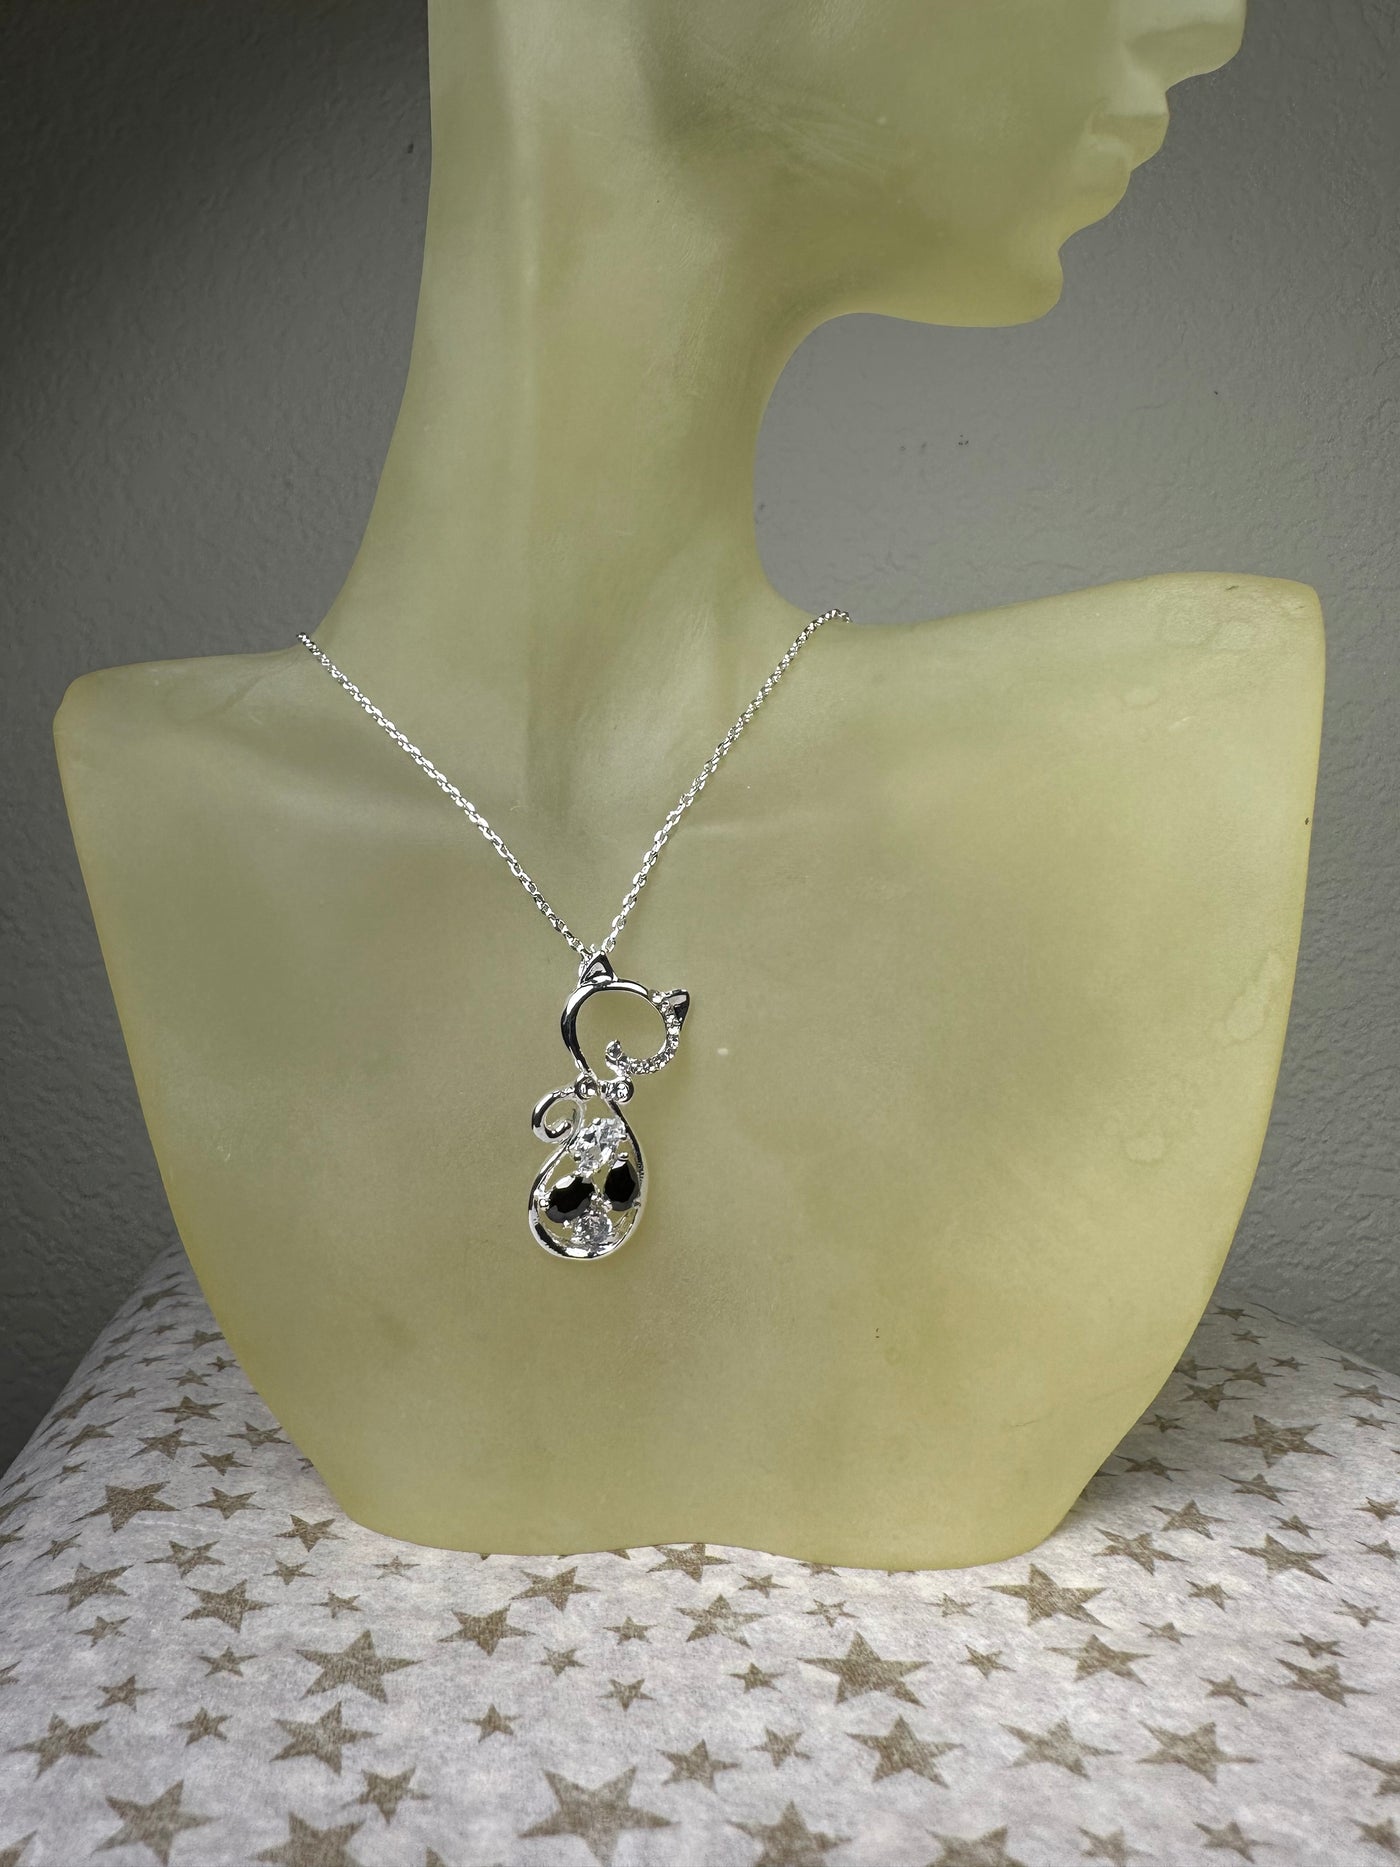 Cat Pendant and Chain Necklace in Silver Tone and Crystals